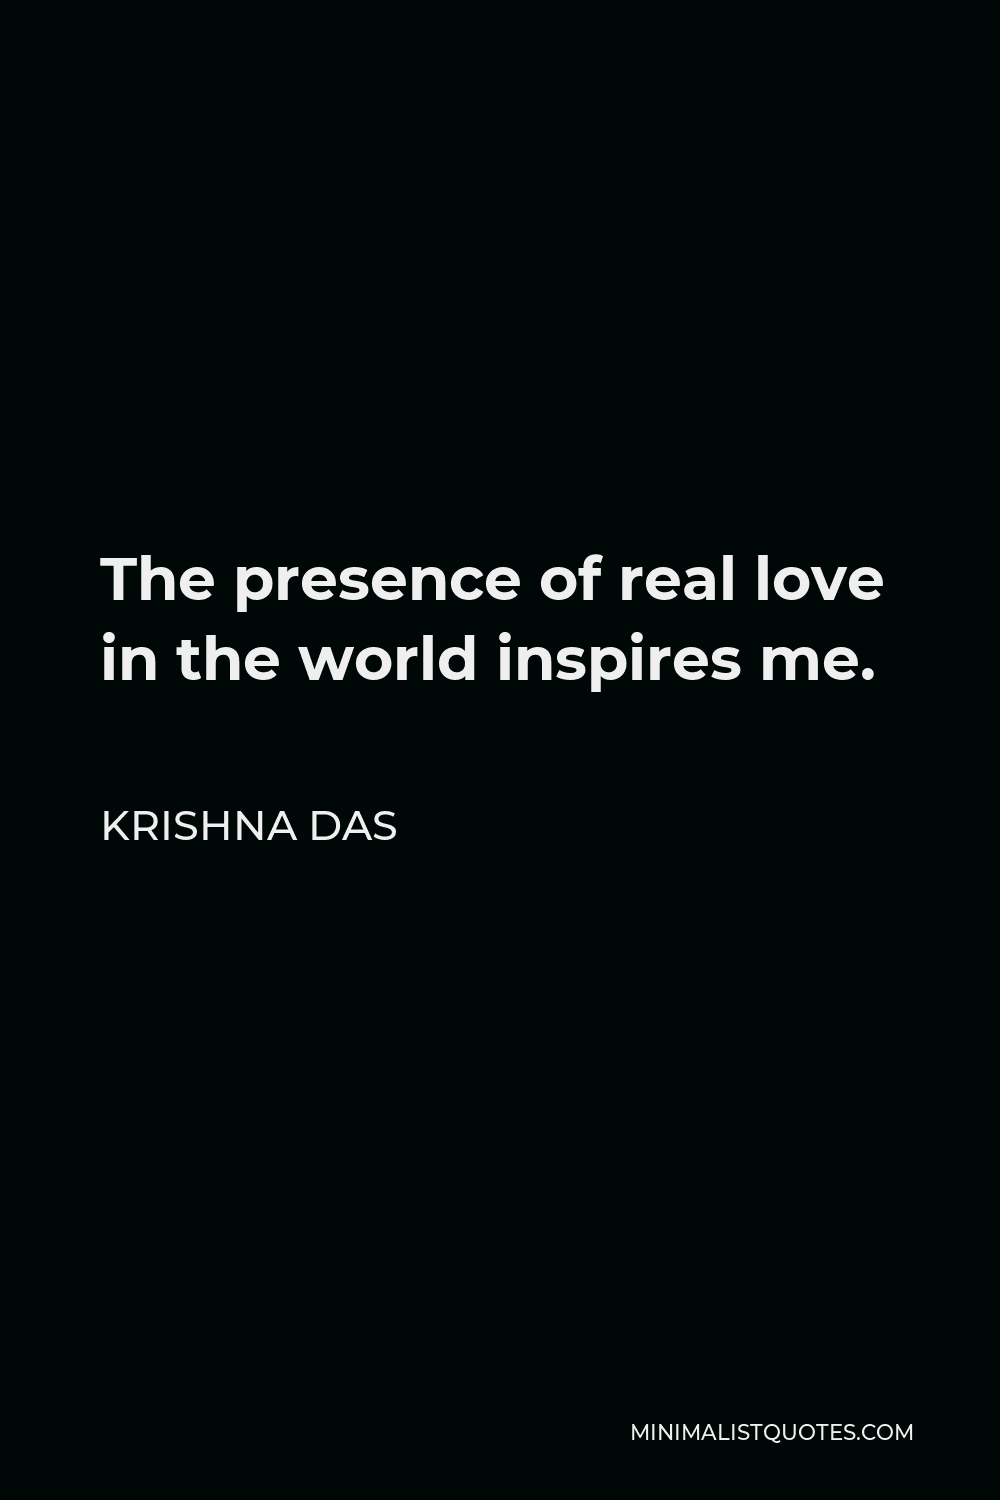 Krishna Das Quote - The presence of real love in the world inspires me.